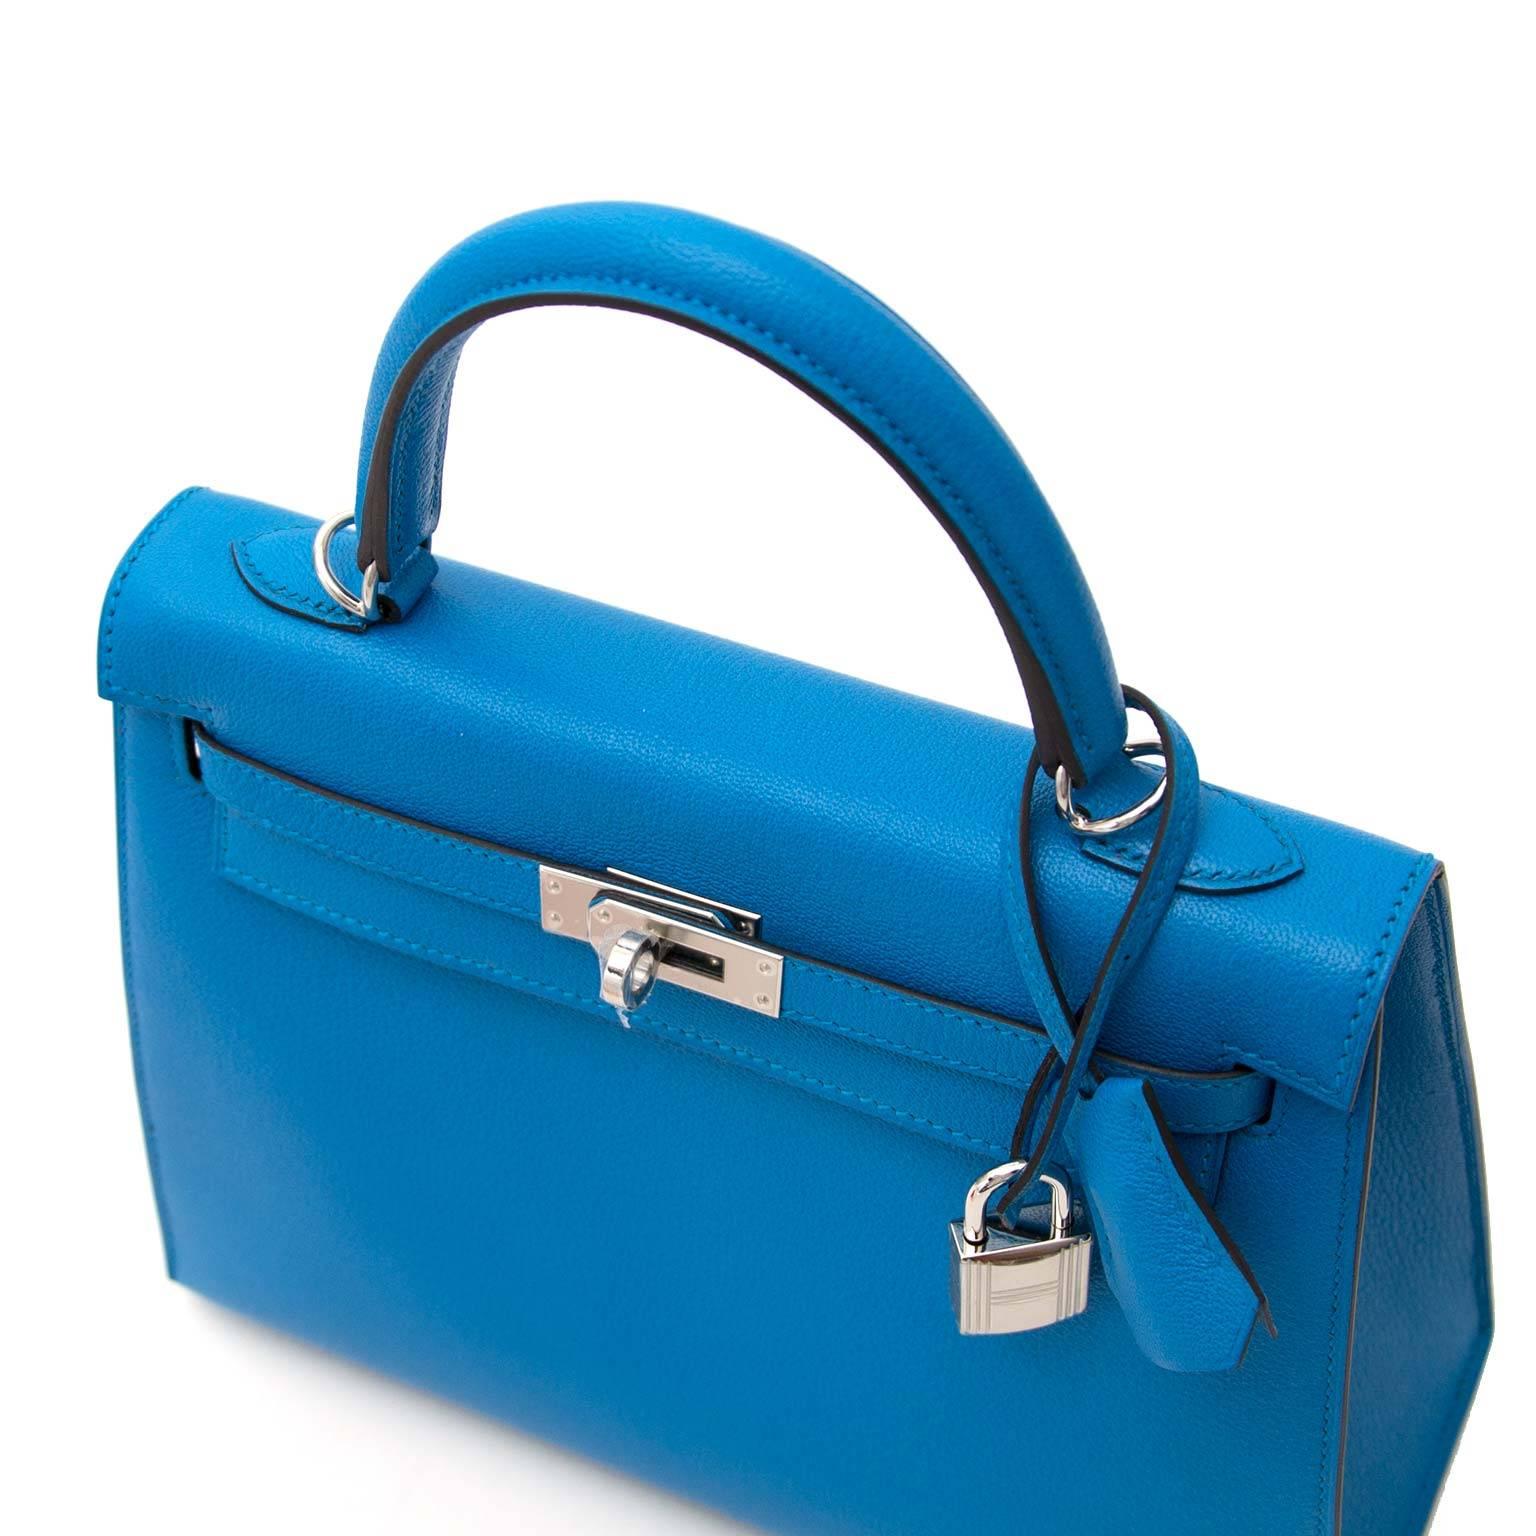 Hermès Kelly 25 Chevre Chanora Zanzibar PHW

This Hermès Kelly comes in a fresh electric blue color named 'Zanzibar'. The Sellier Kelly has tonal stitching, a front toggle closure, a clochette with lock and keys, a single rolled handle and an